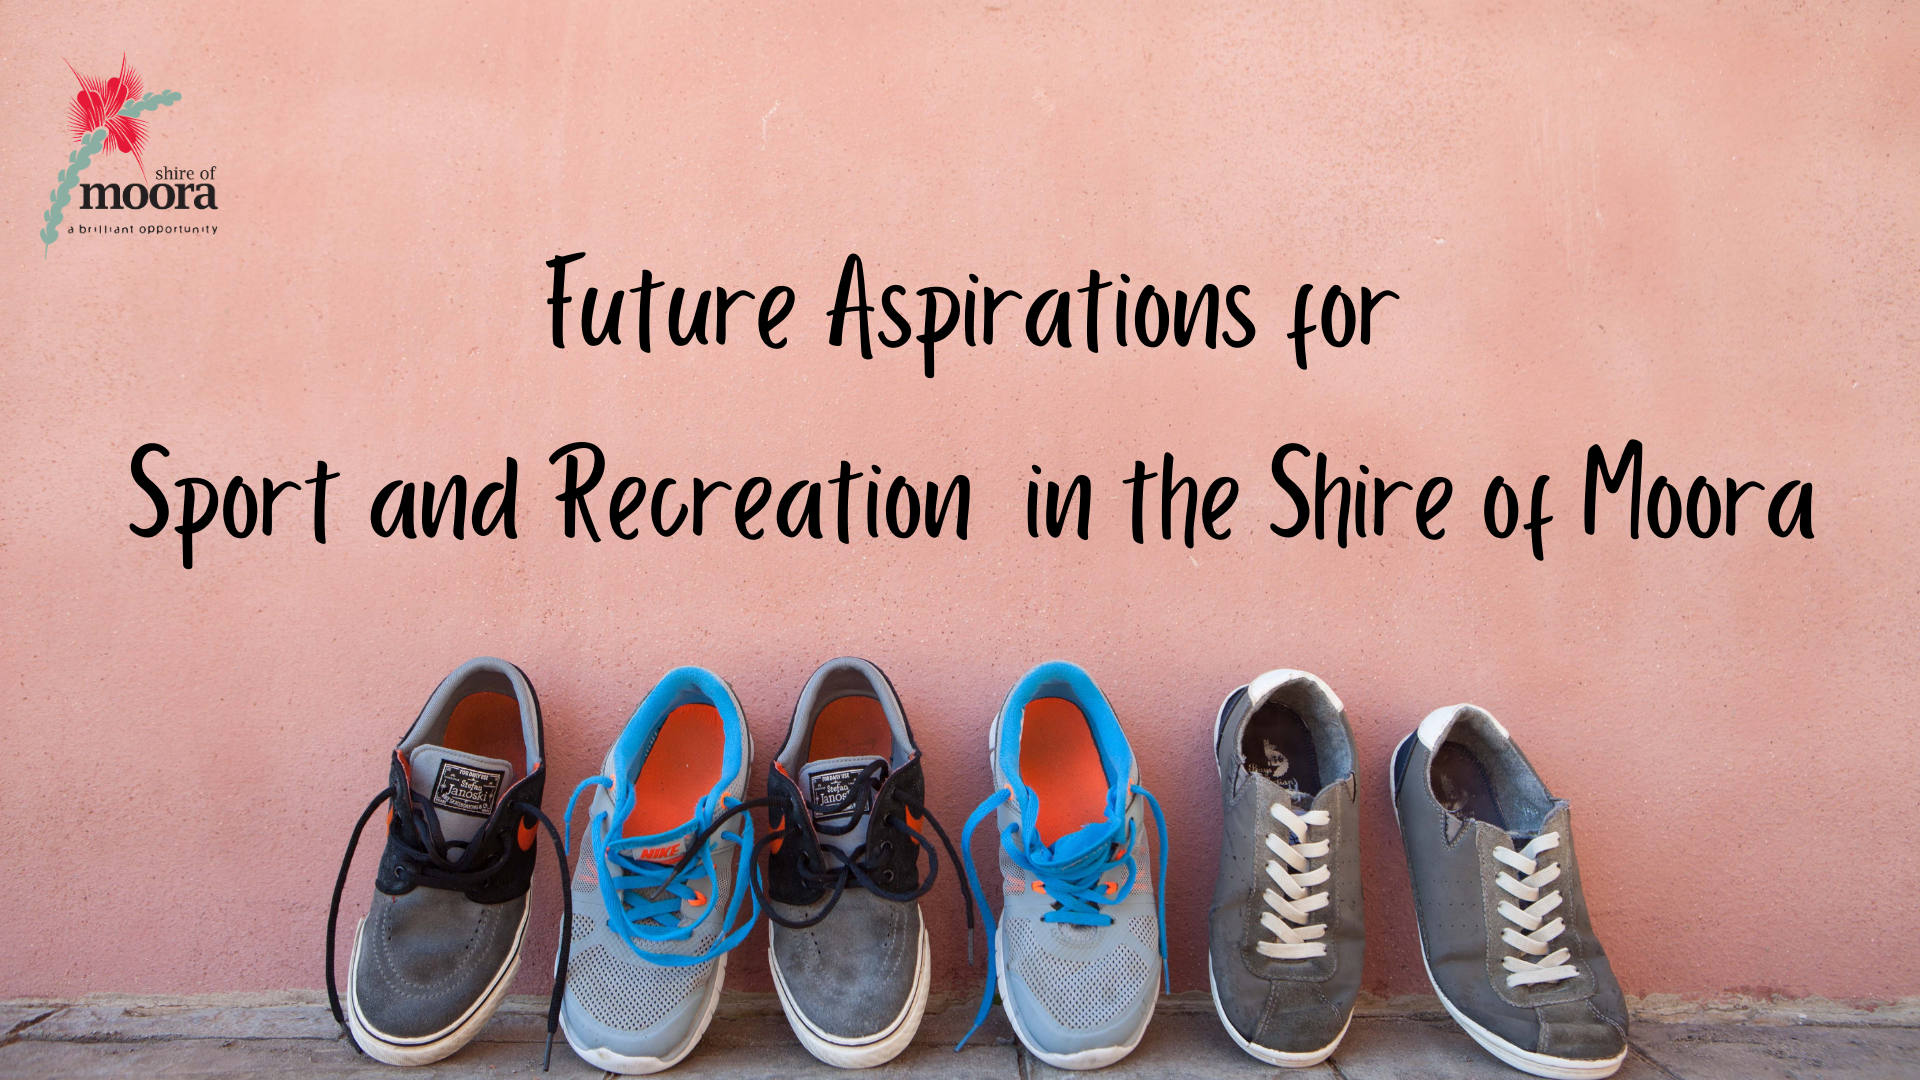 Future Aspirations for Sport and Recreation in the Shire of Moora